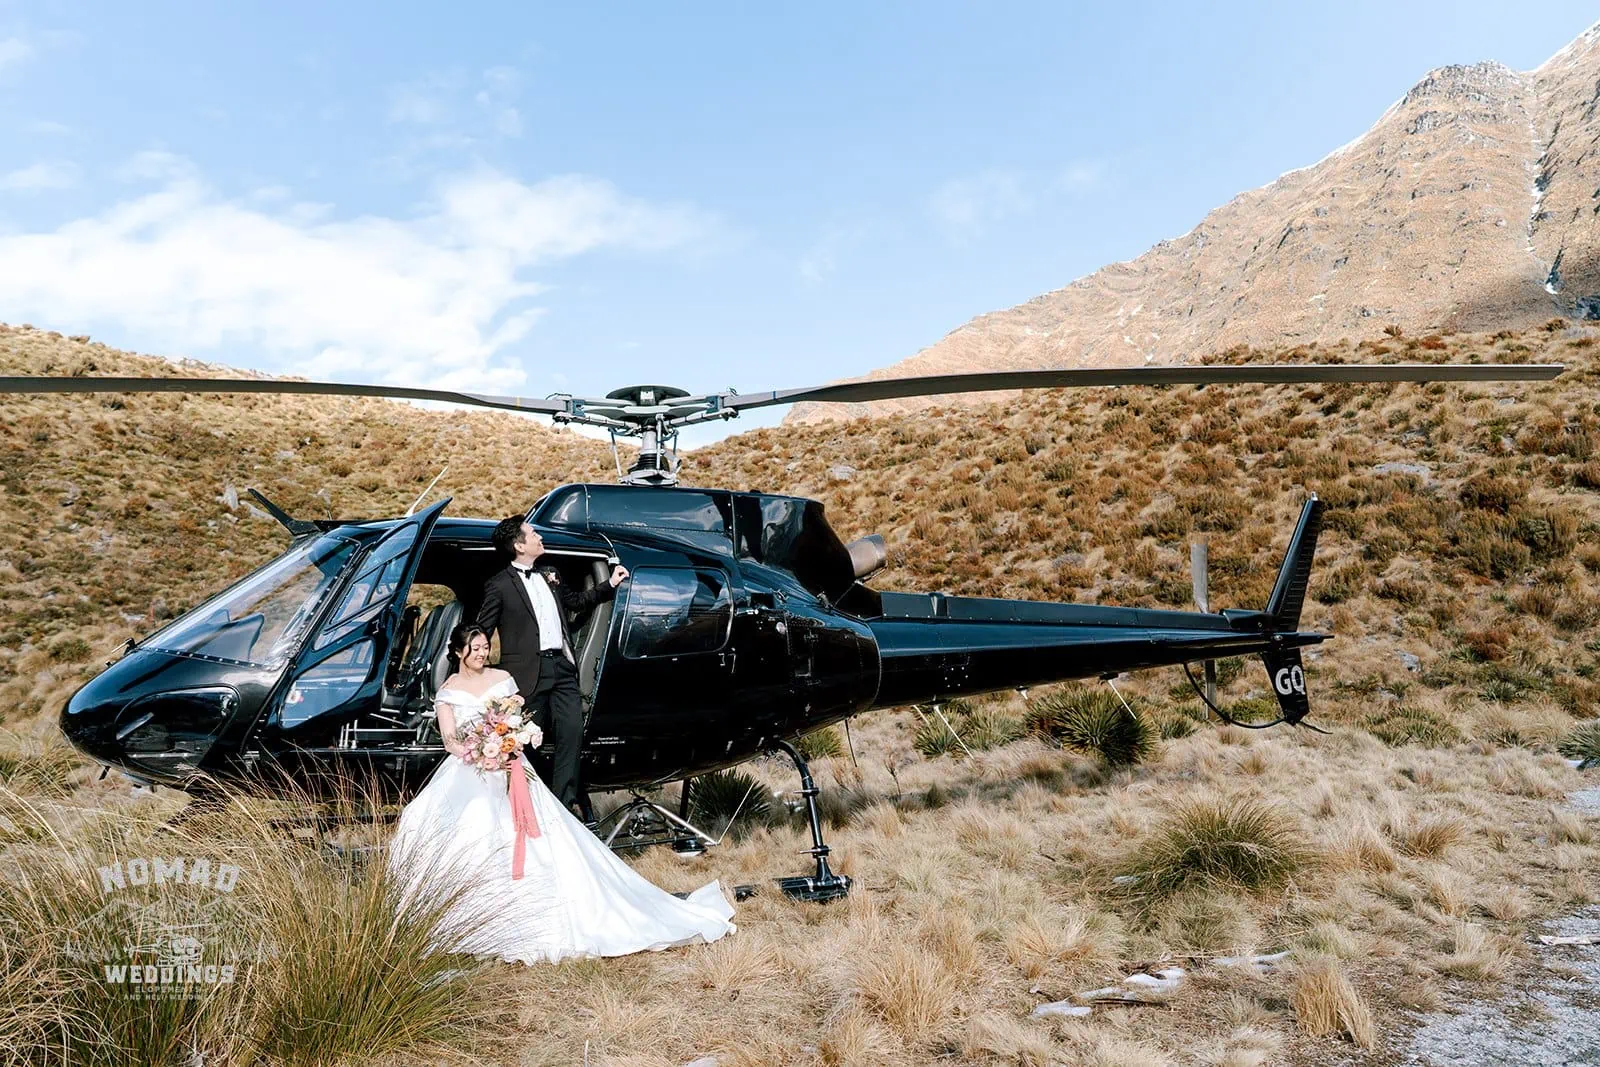 Queenstown New Zealand Elopement Wedding Photographer - Bo and Junyi's heli pre wedding shoot took place in the mountains, with 4 landings, and featured a bride and groom next to a helicopter.